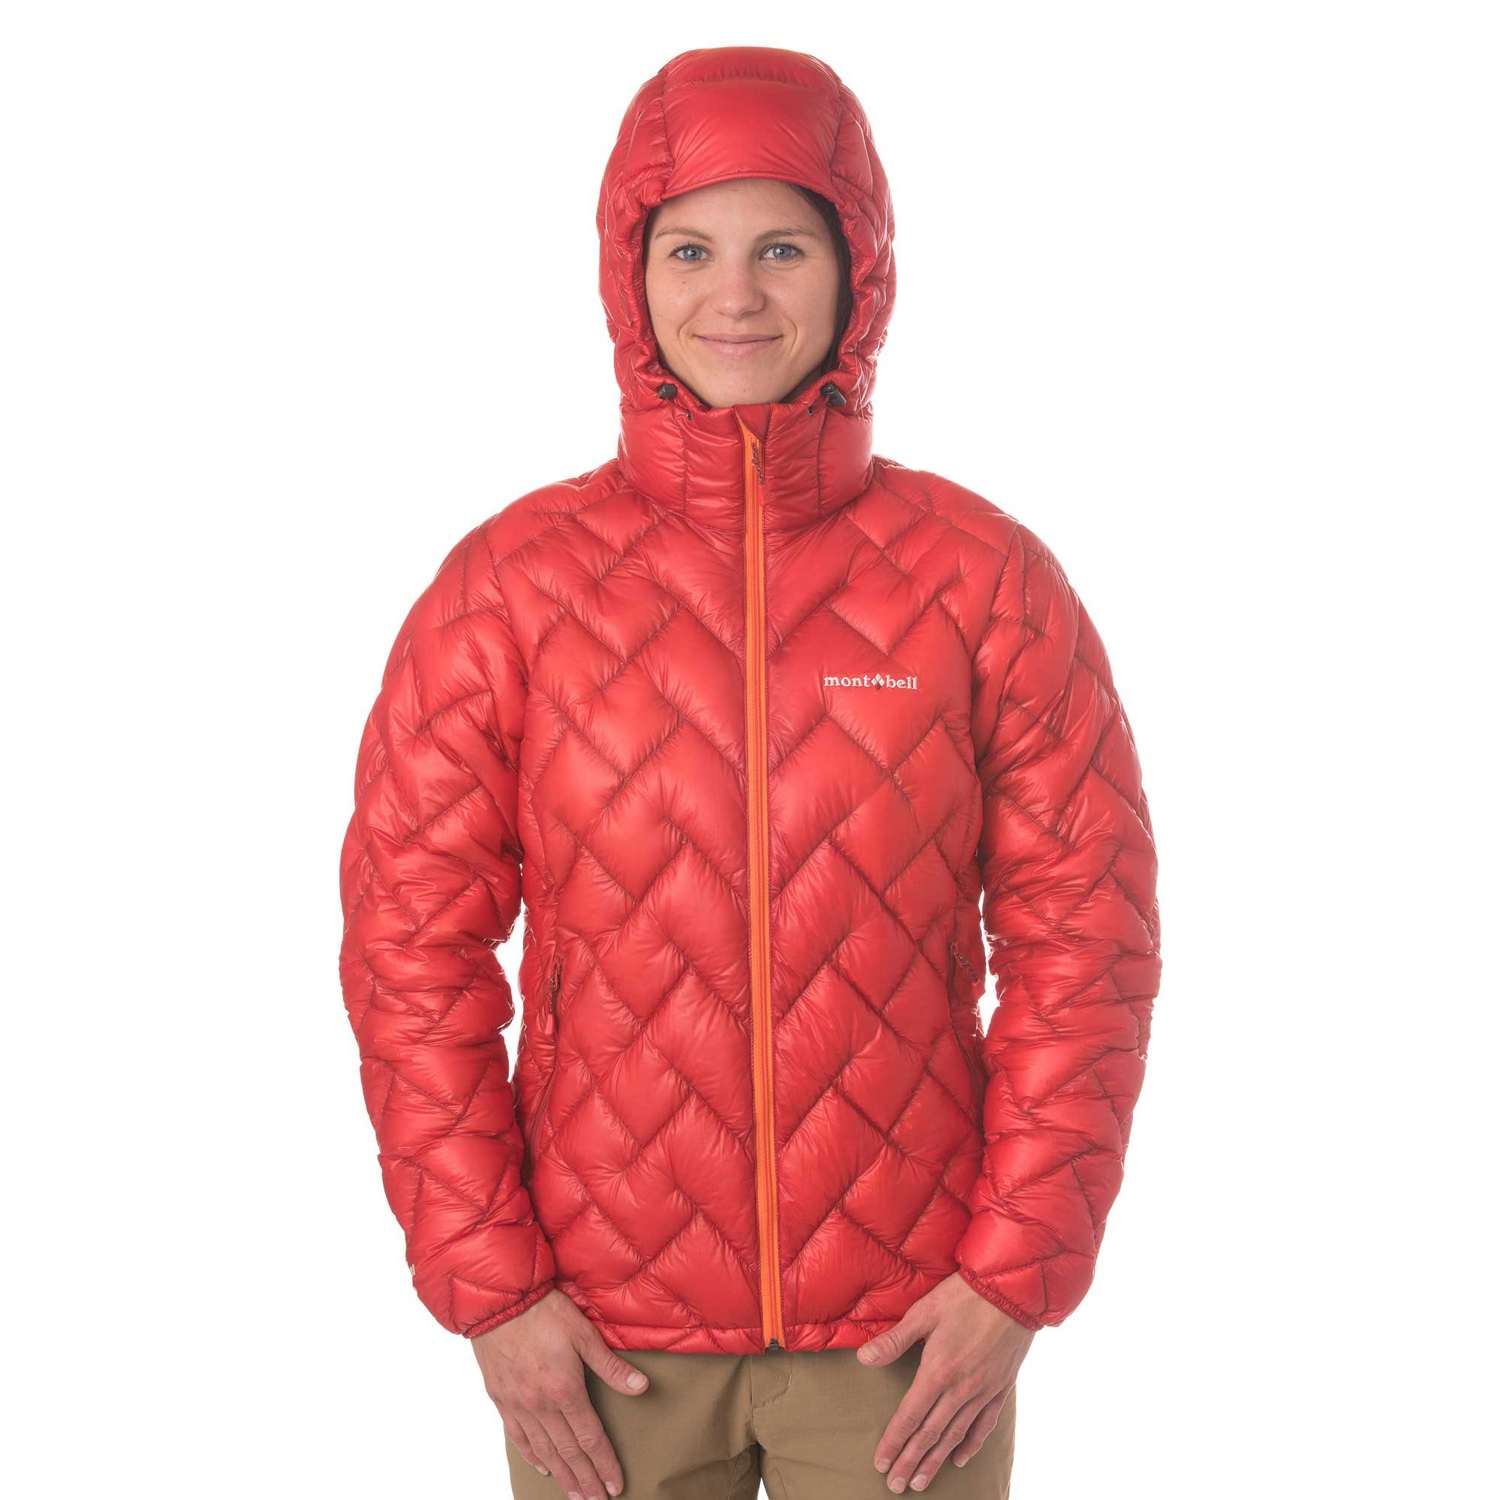 Unlock Wilderness' choice in the Montbell Vs North Face comparison, the Plasma 1000 Alpine Down Parka by Montbell